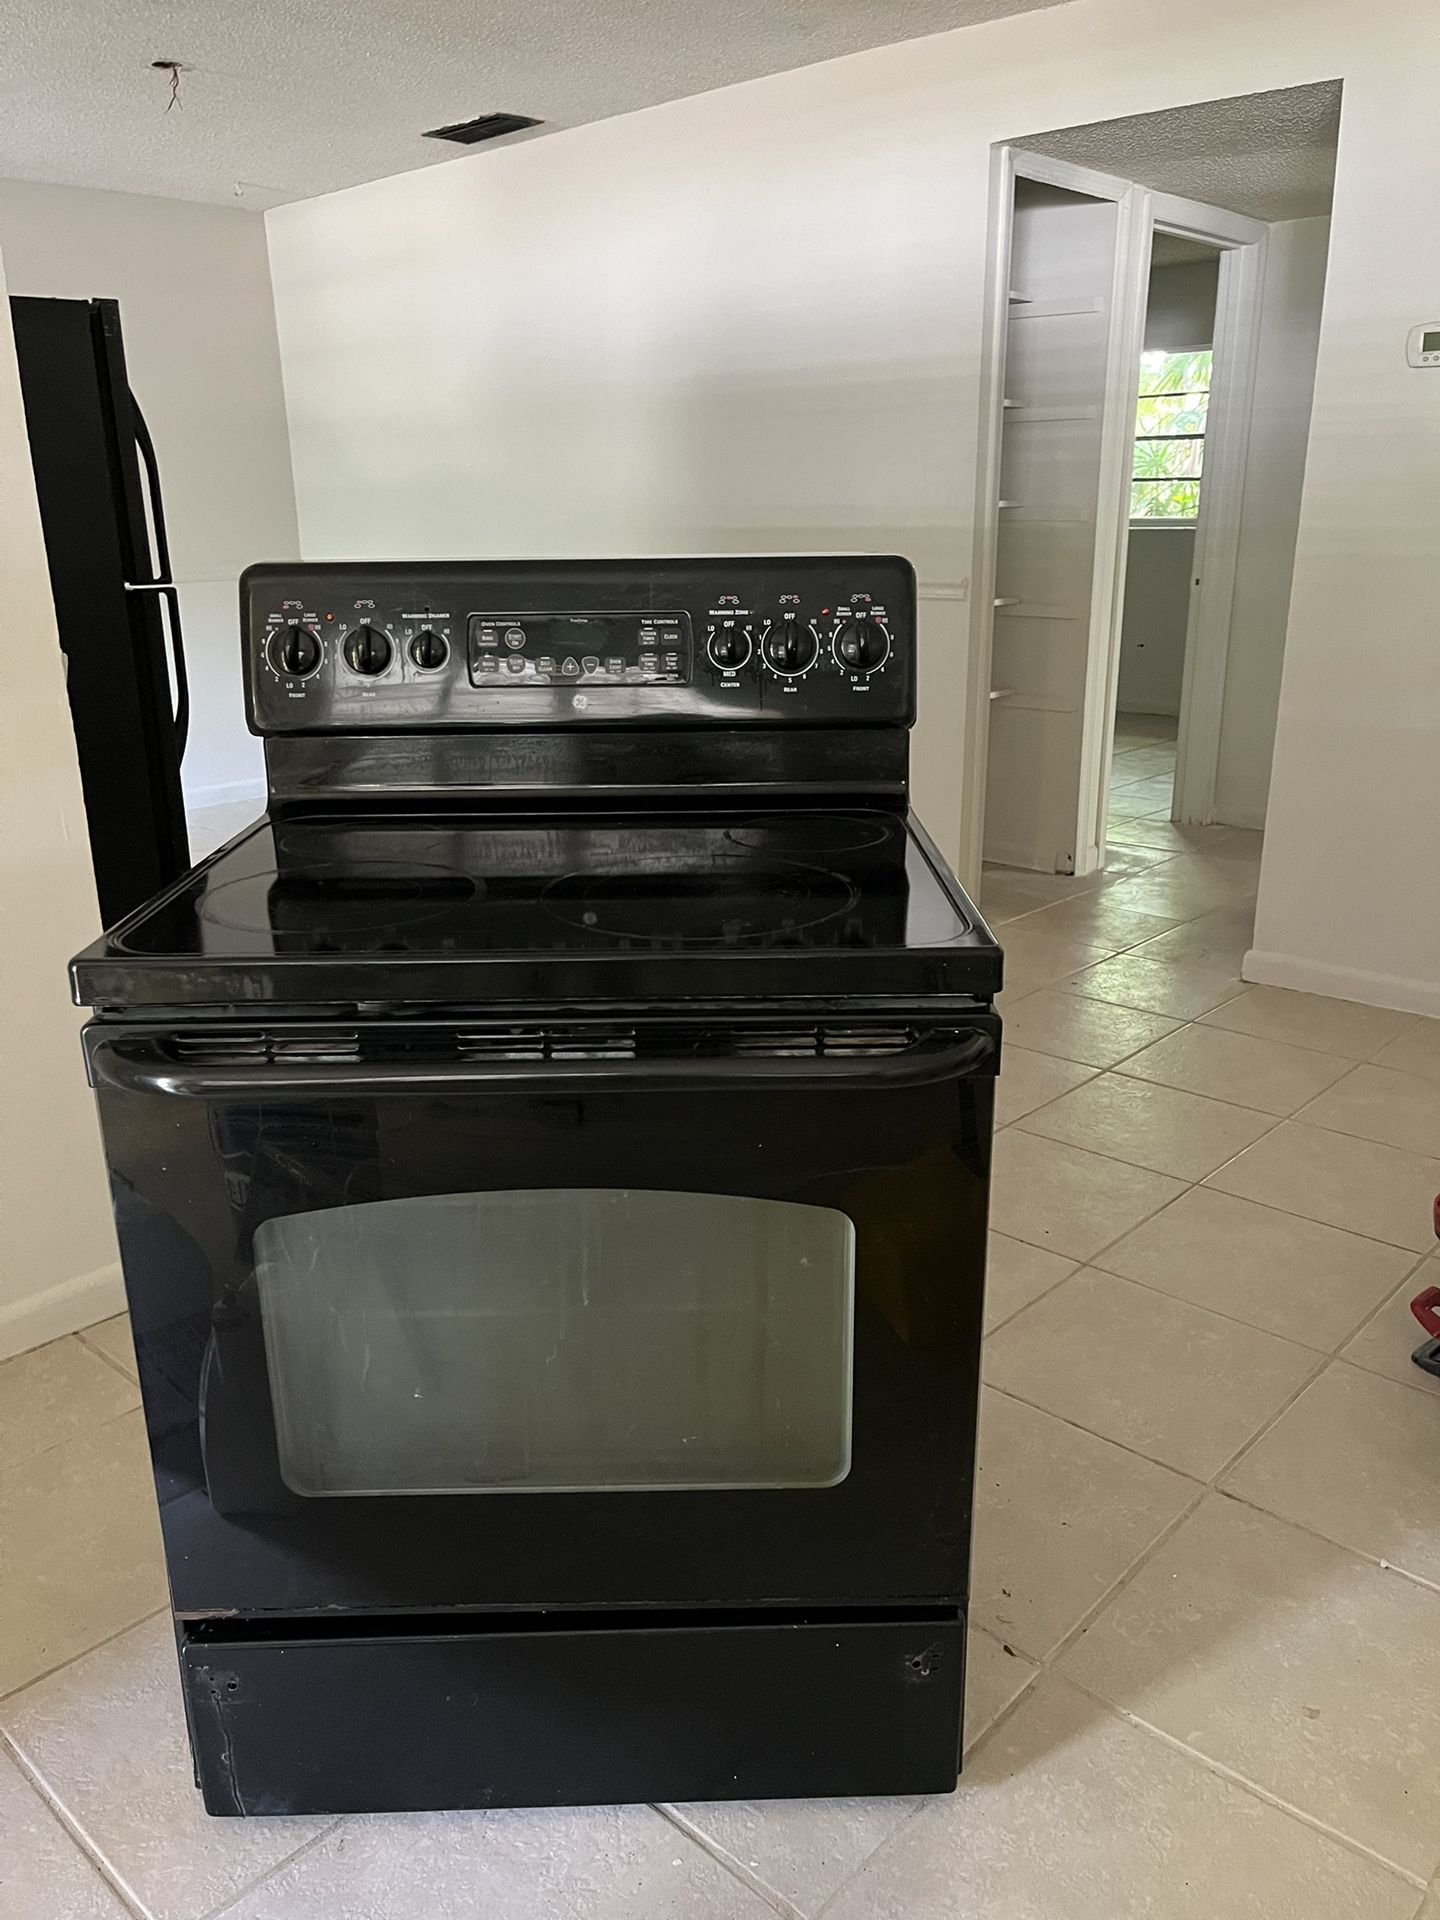 CLEAN GE STOVE FOR SALE $90